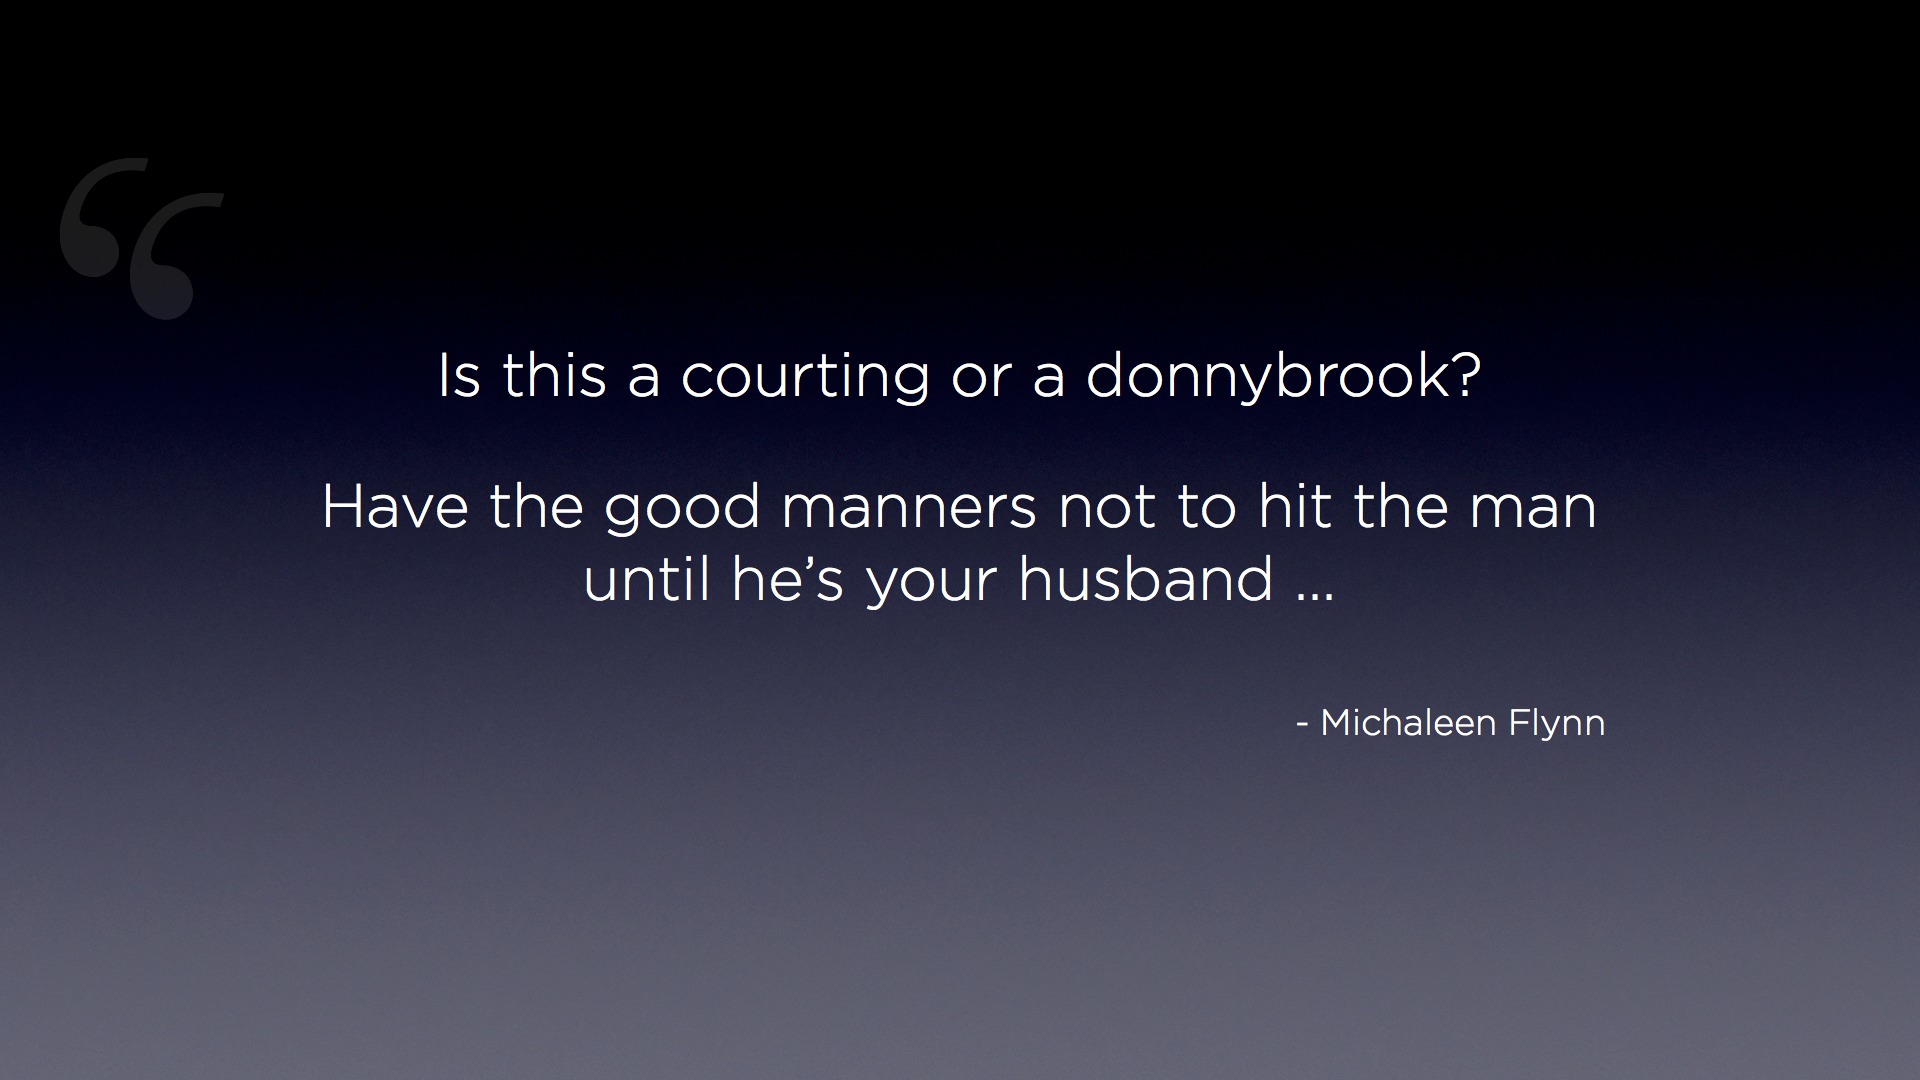 ‎"Is this a courting or a donnybrook? Have the good manners not to hit the man until he's your husband ..." - Michaleen Flynn